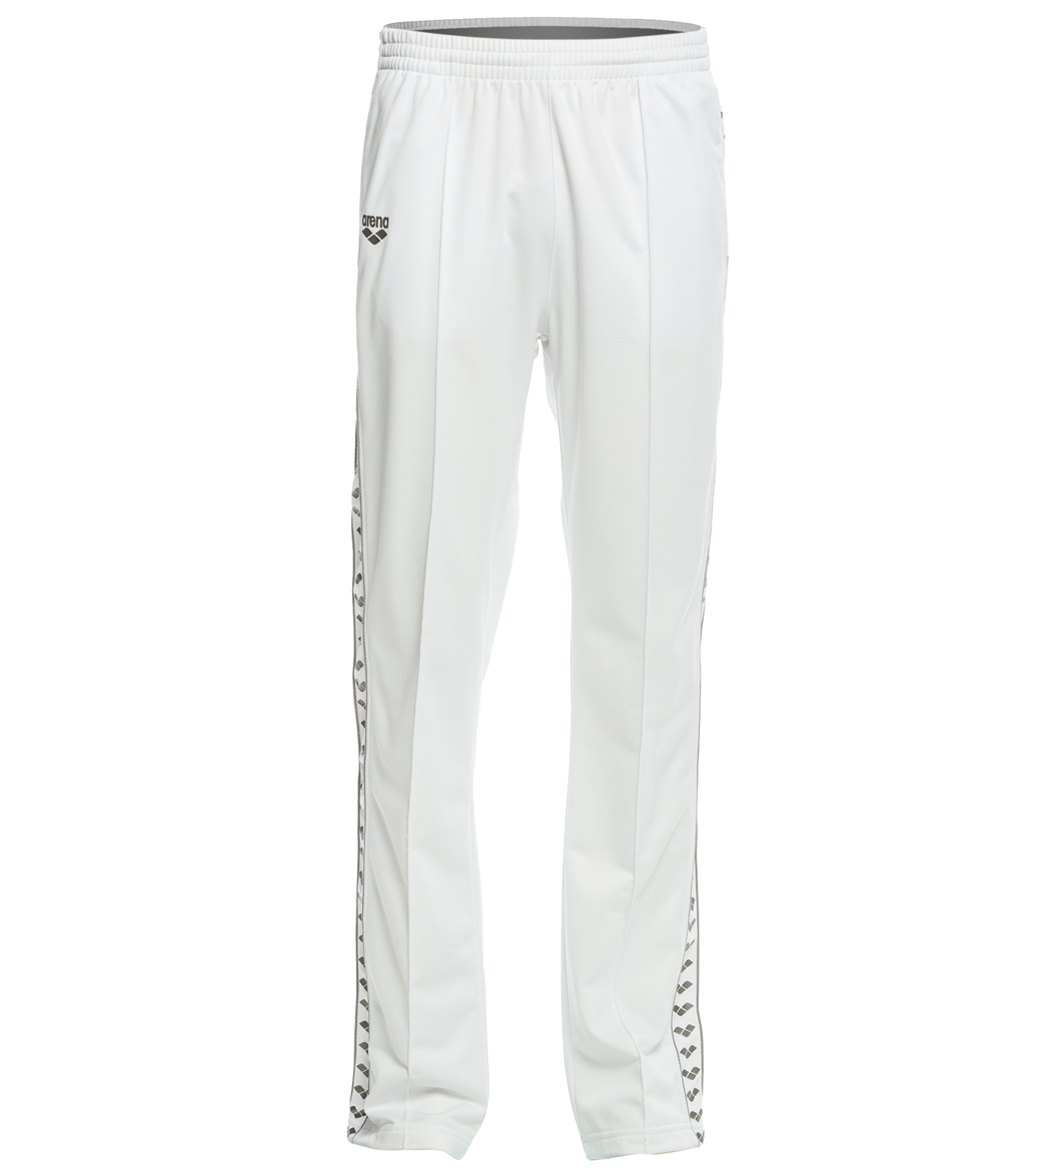 Arena Throttle Warm Up Pant at SwimOutlet.com - Free Shipping